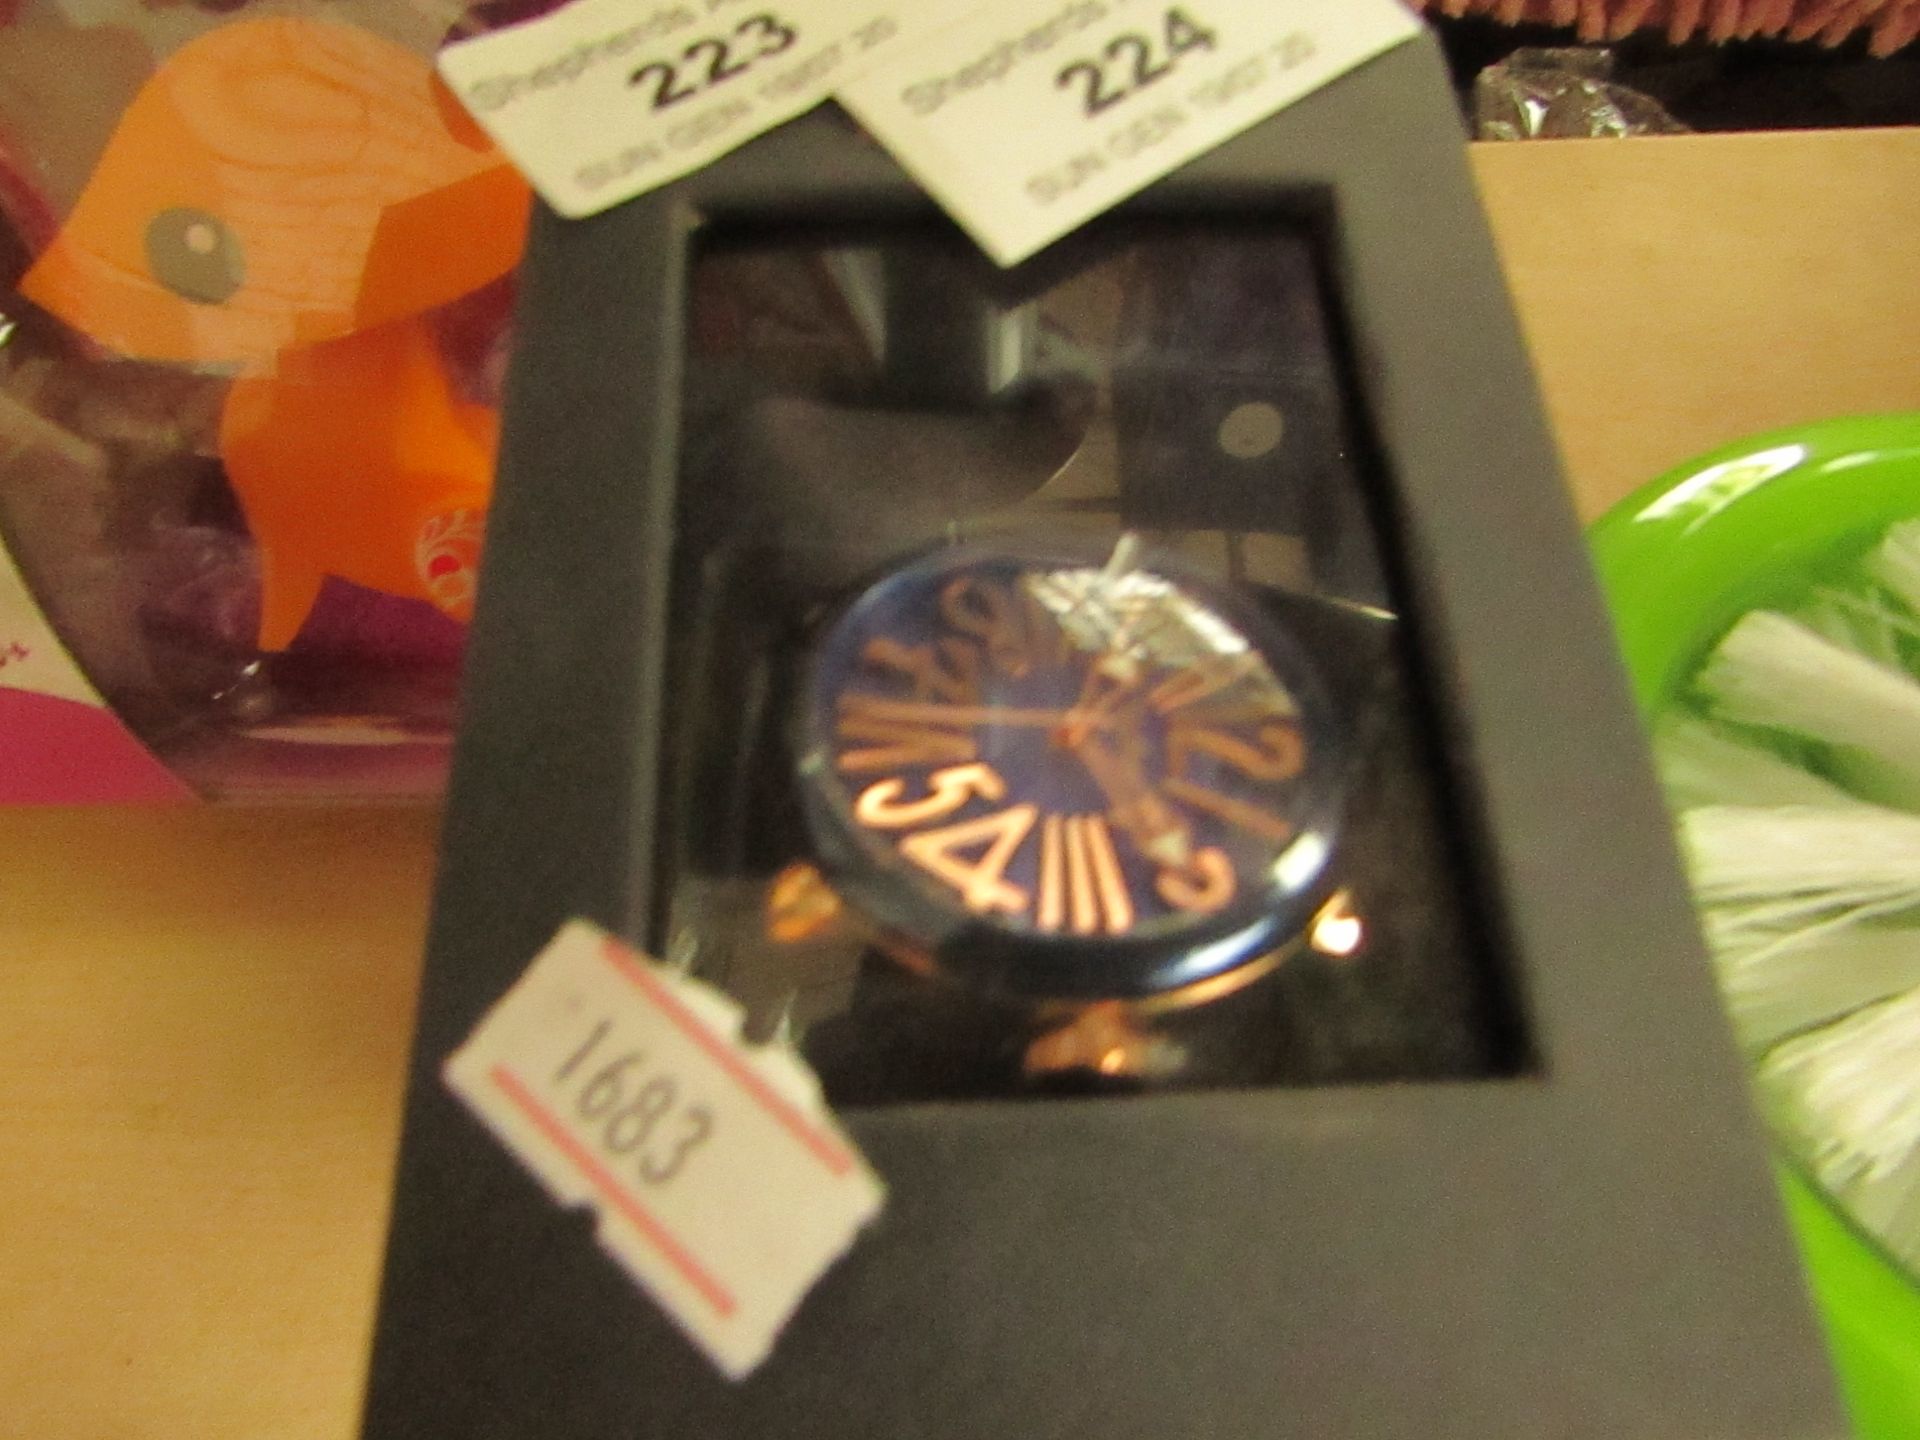 Pocket Branded Watch. Unused with Box. See Image For design